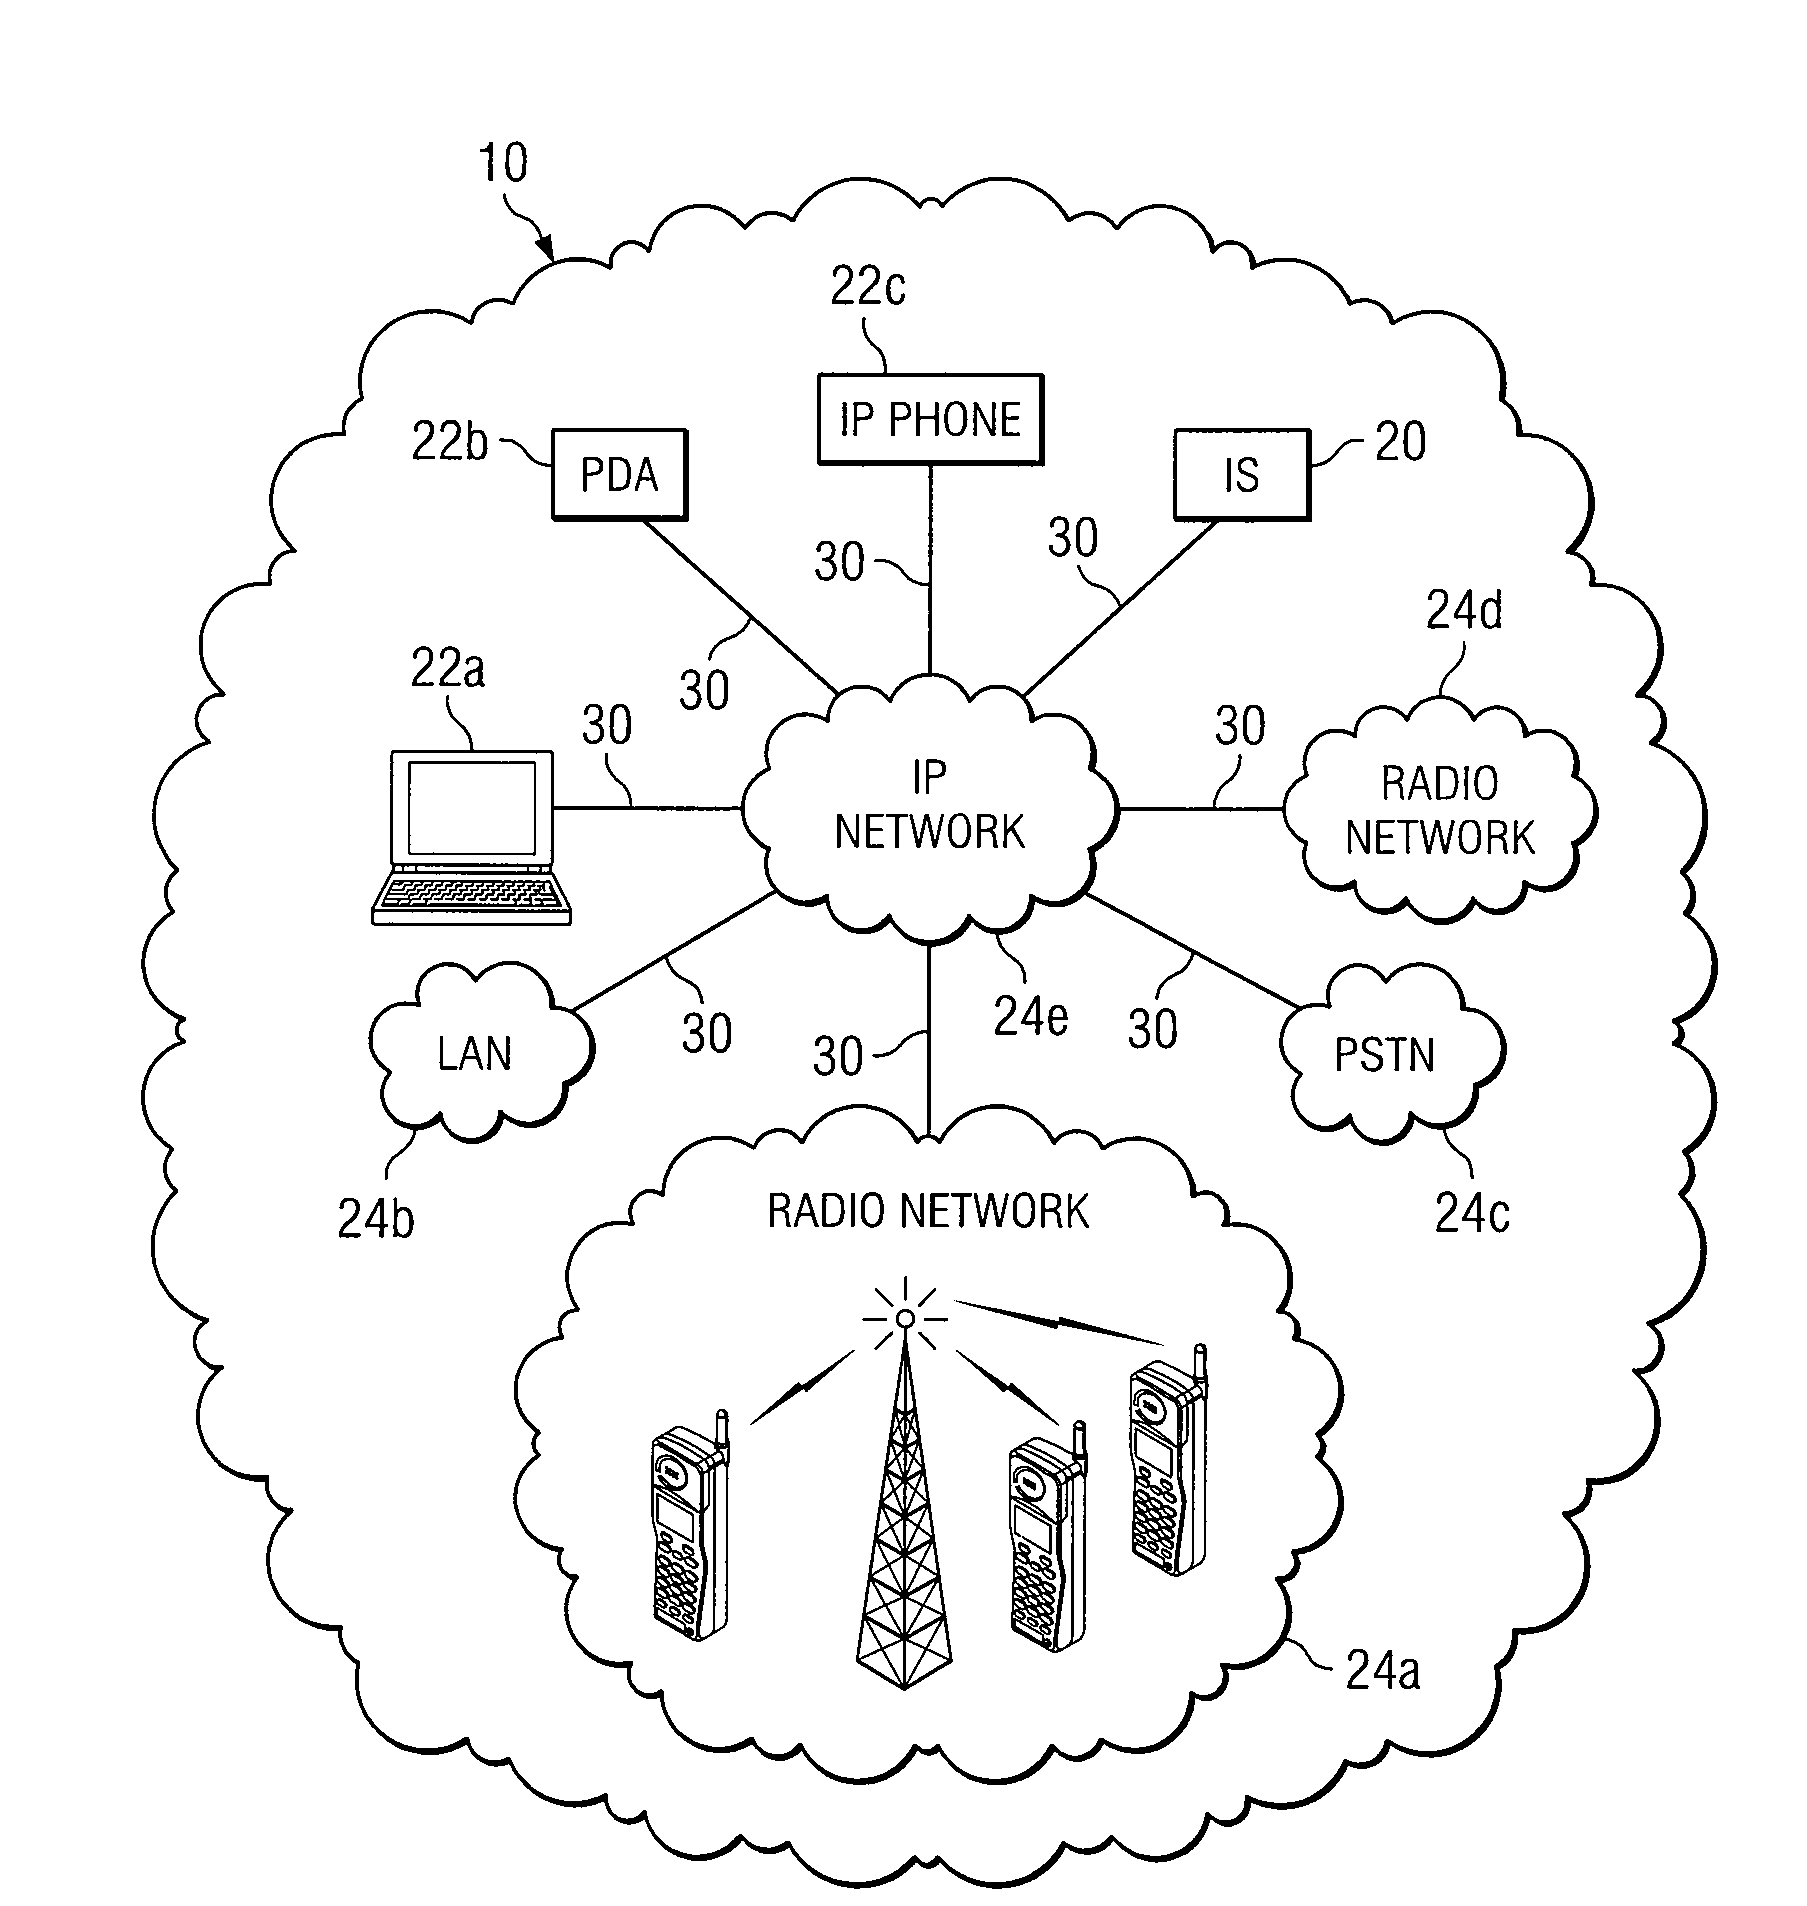 Method and System for Managing a Plurality of Virtual Talk Groups